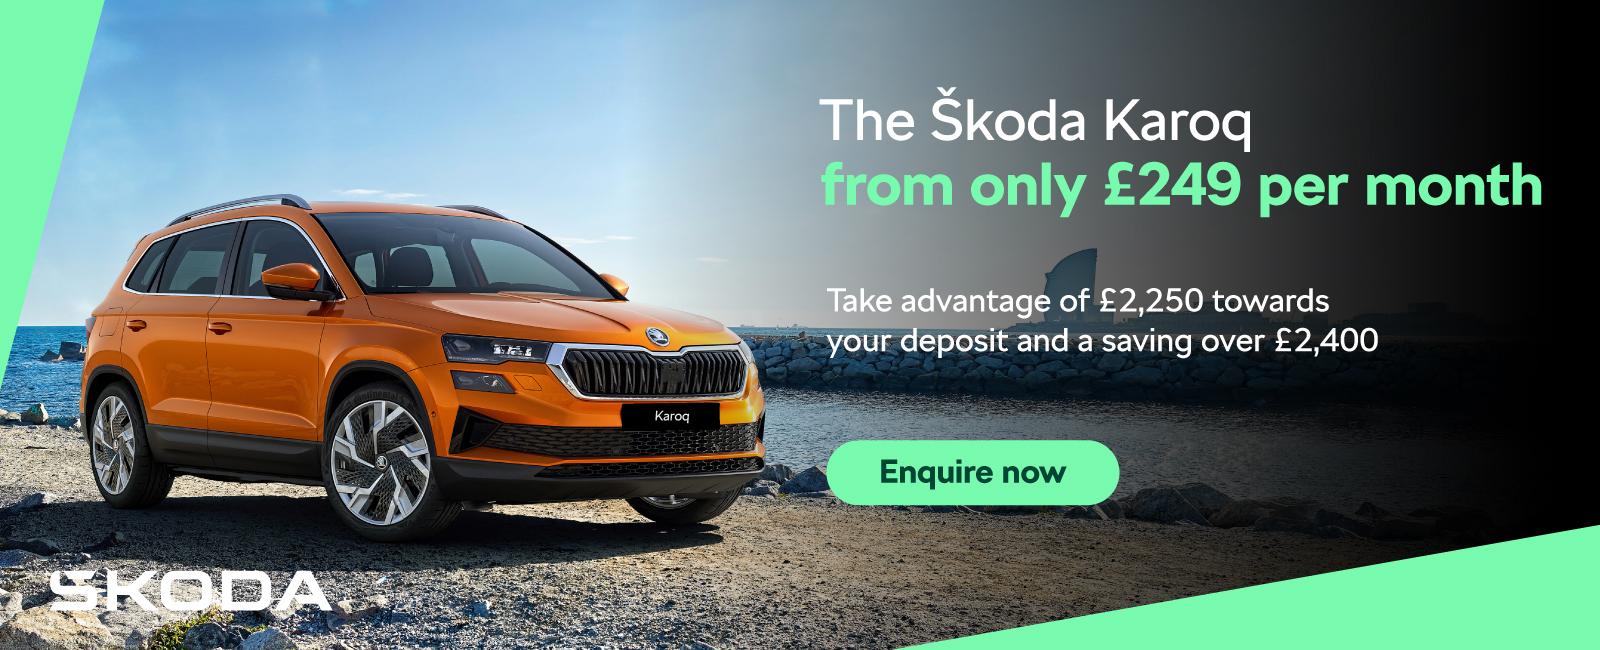 The Skoda Karoq from only £249 per month